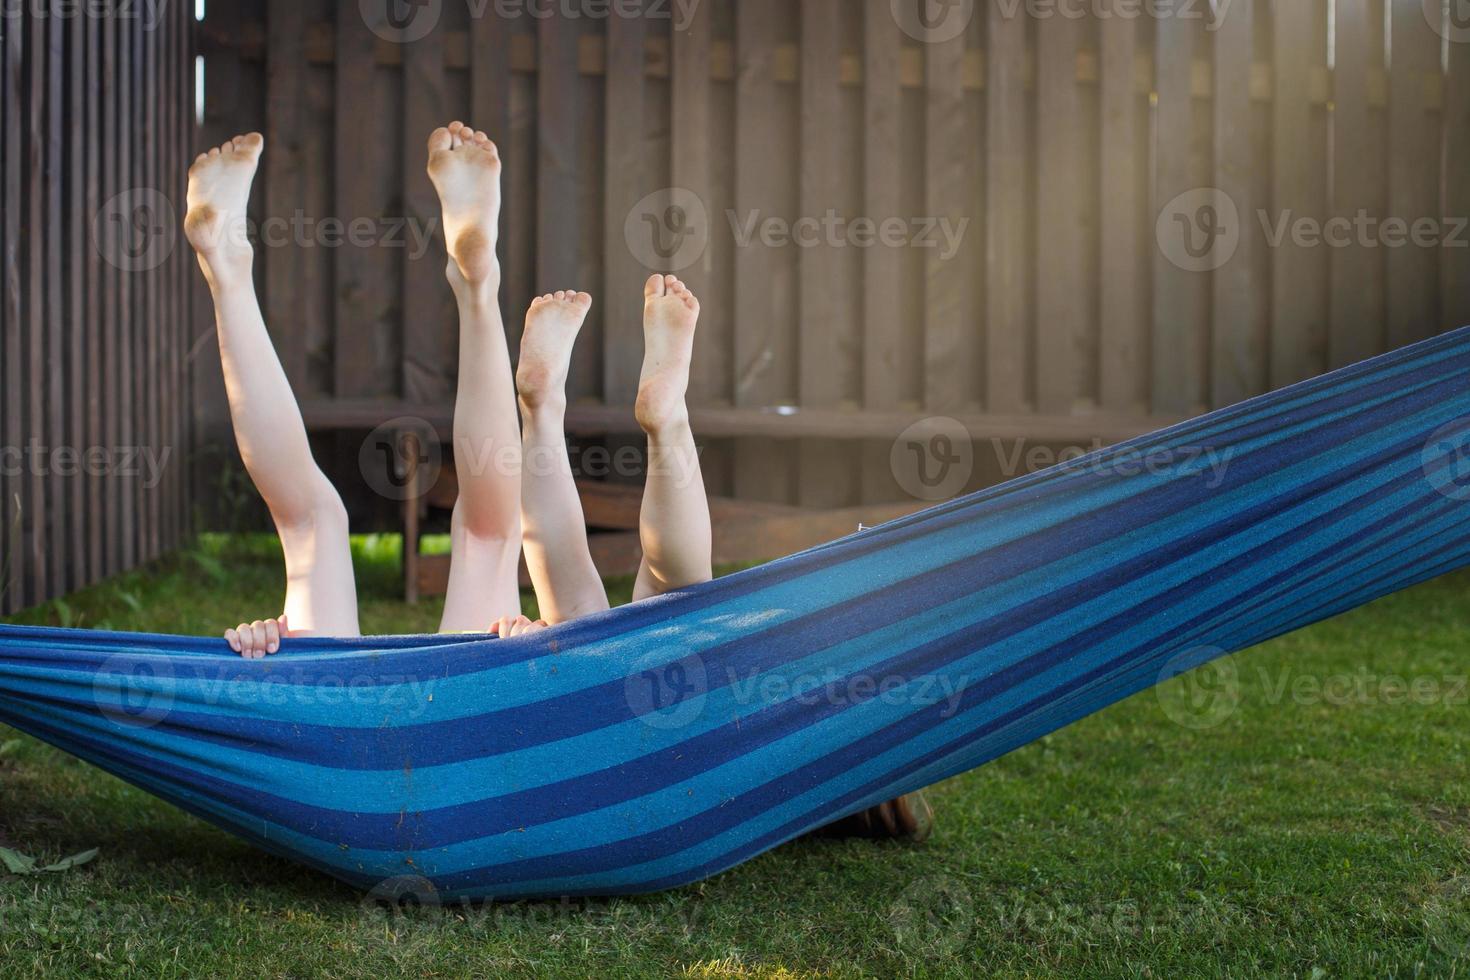 happy kids relaxing in a hammock outdoor. children's feet barefoot. Holidays vacation photo